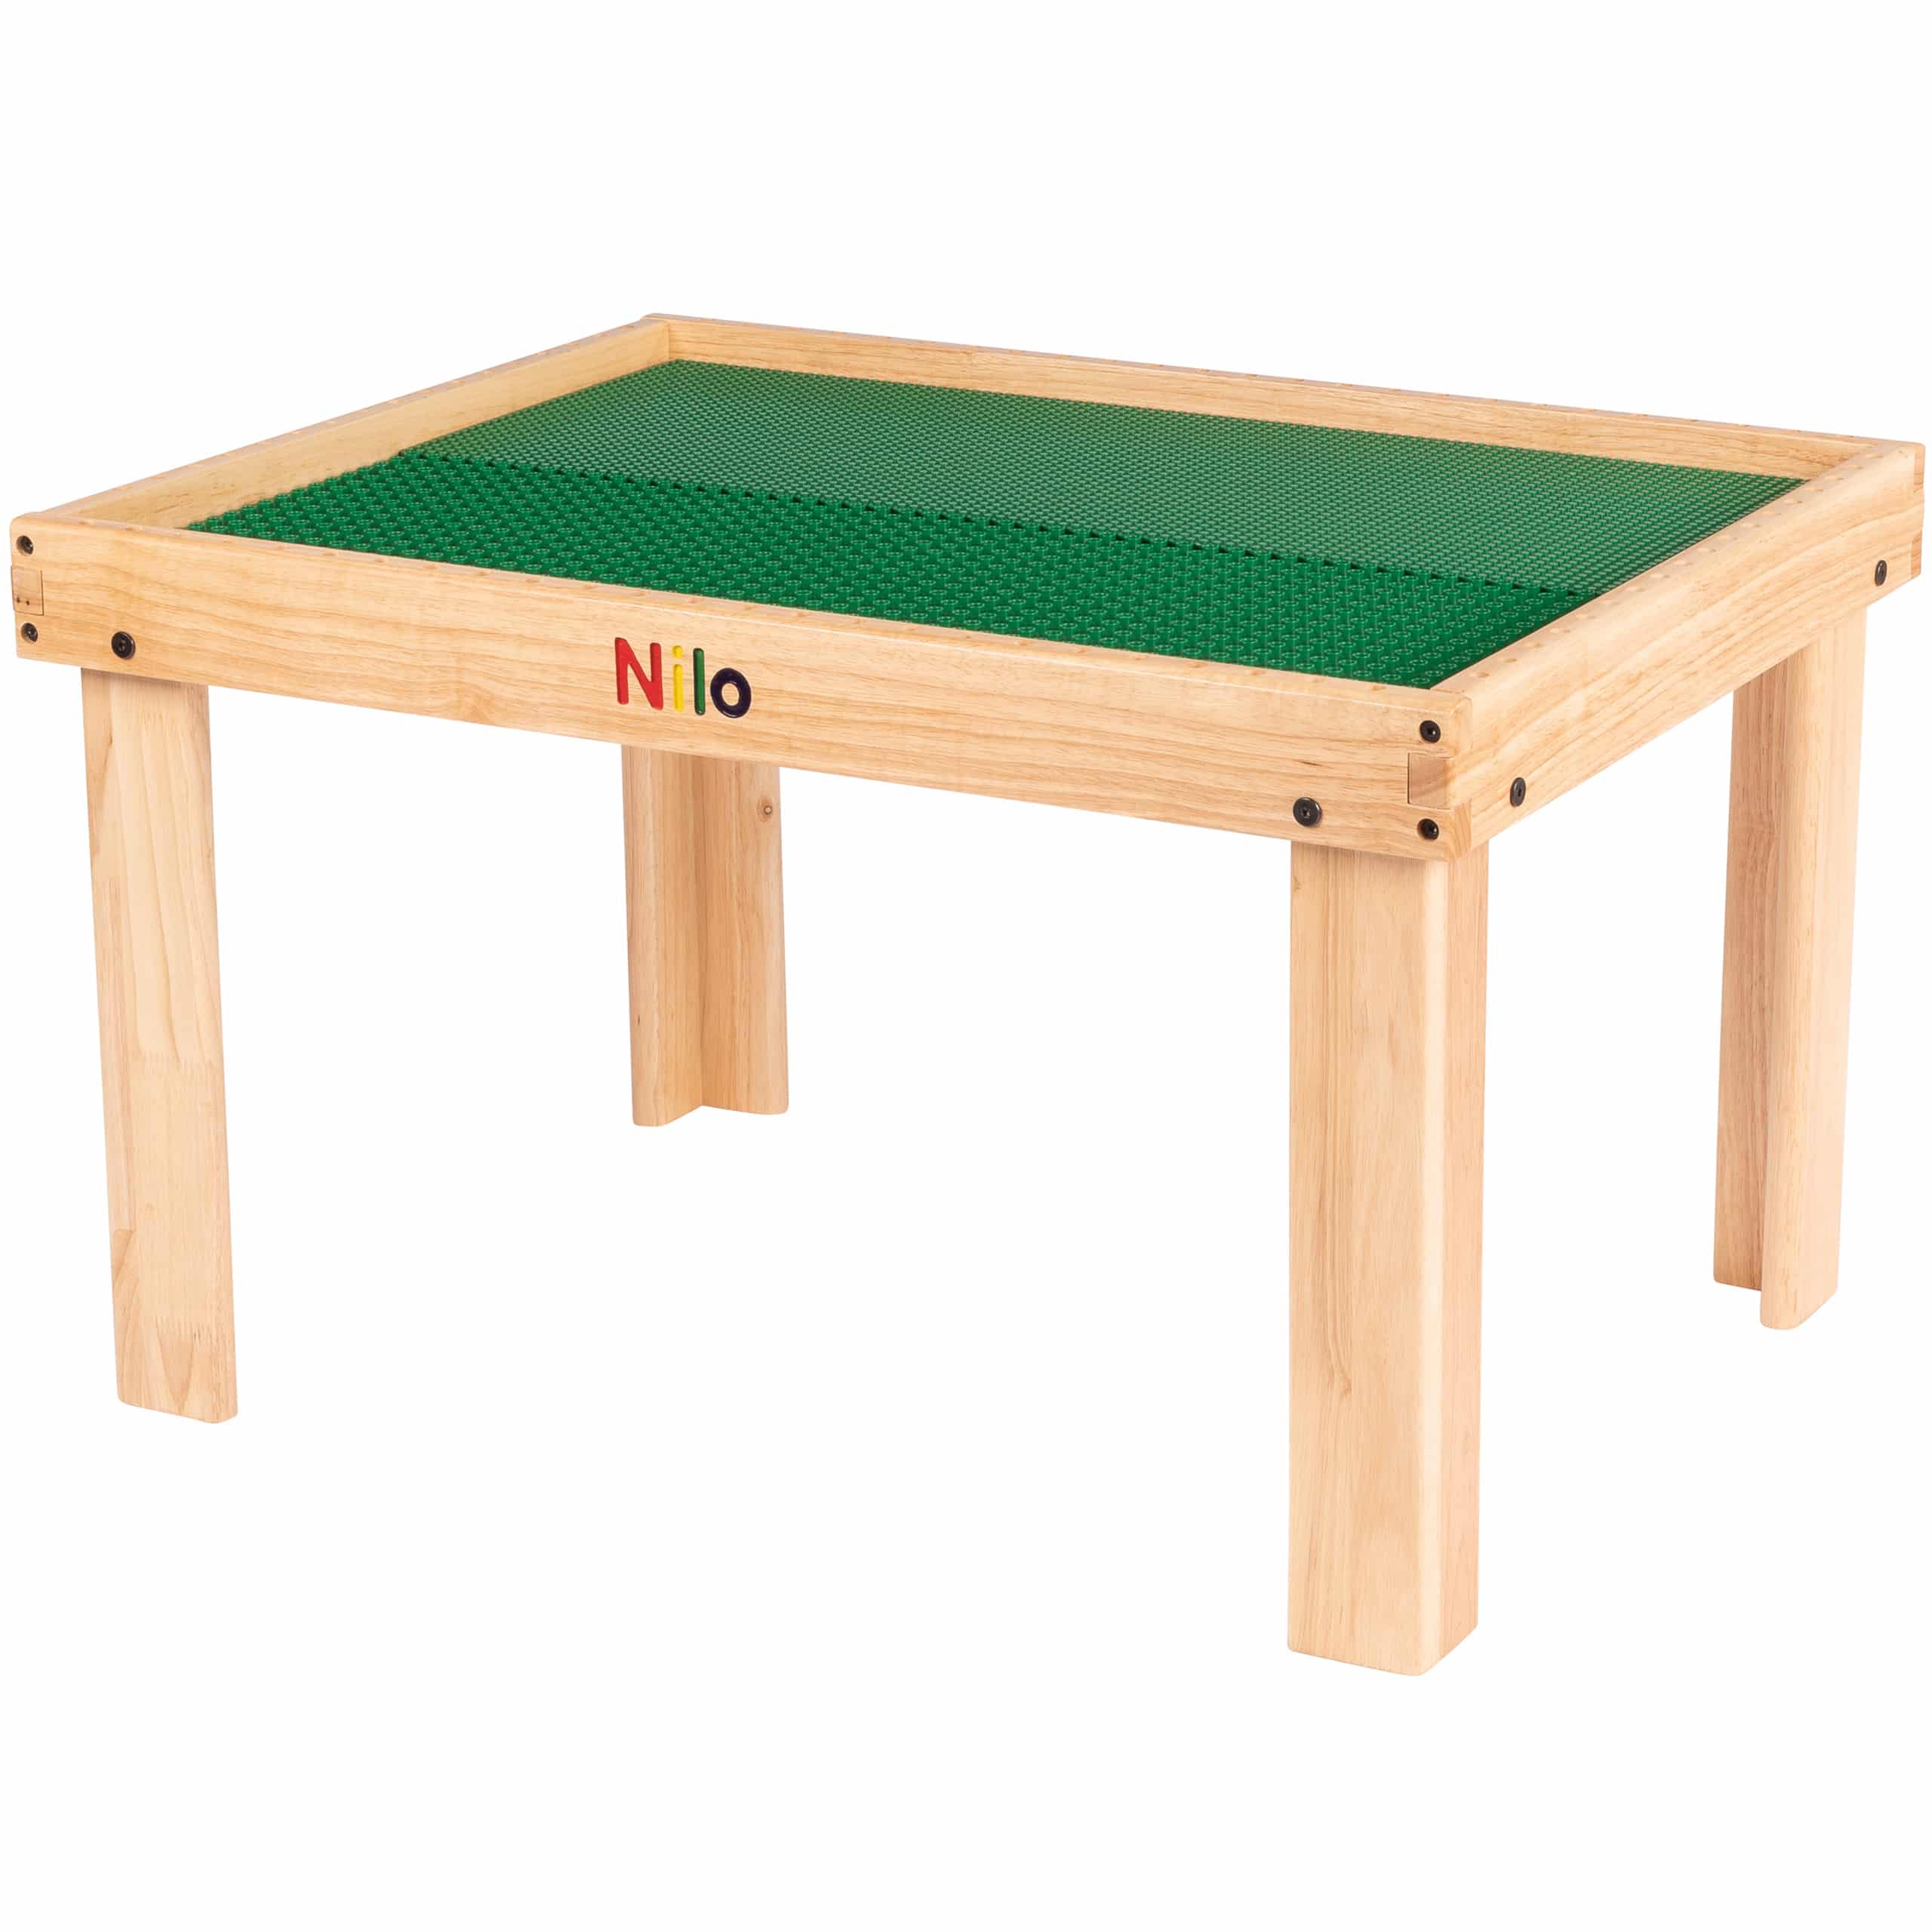 Small Activity Table | Toy Table for Kids | Baseplates Included